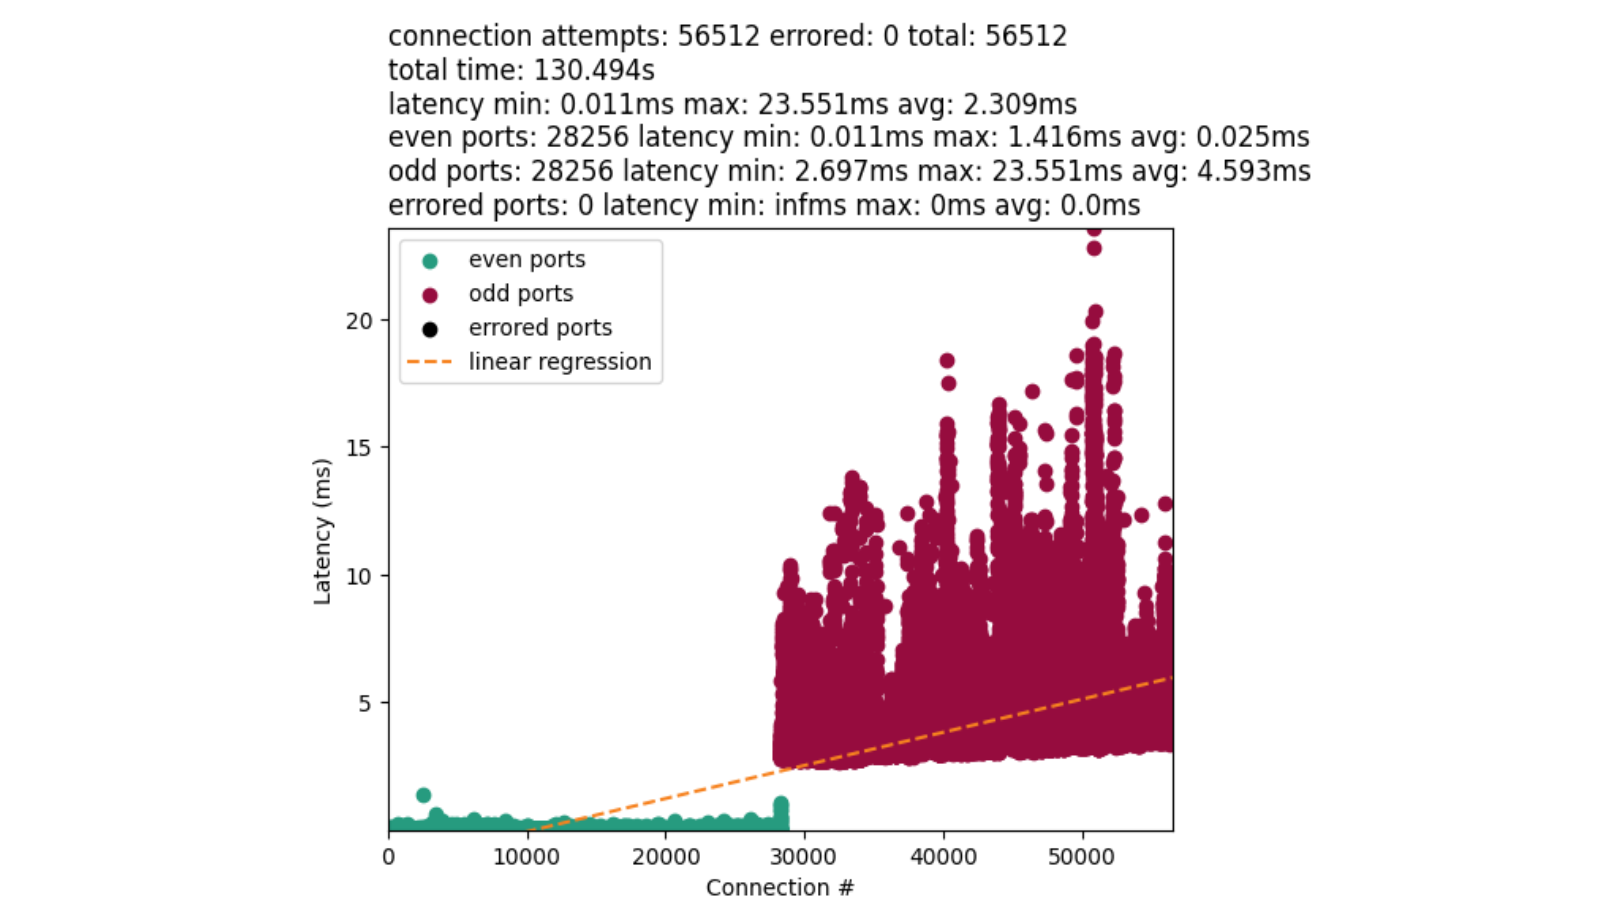 Figure 5: A detailed chart representing the bimodal distribution of port-finding speeds. Out of 56,512 connections the average time spent finding an even port is 0.025 milliseconds while we see 4.59 milliseconds on average for odd ports.